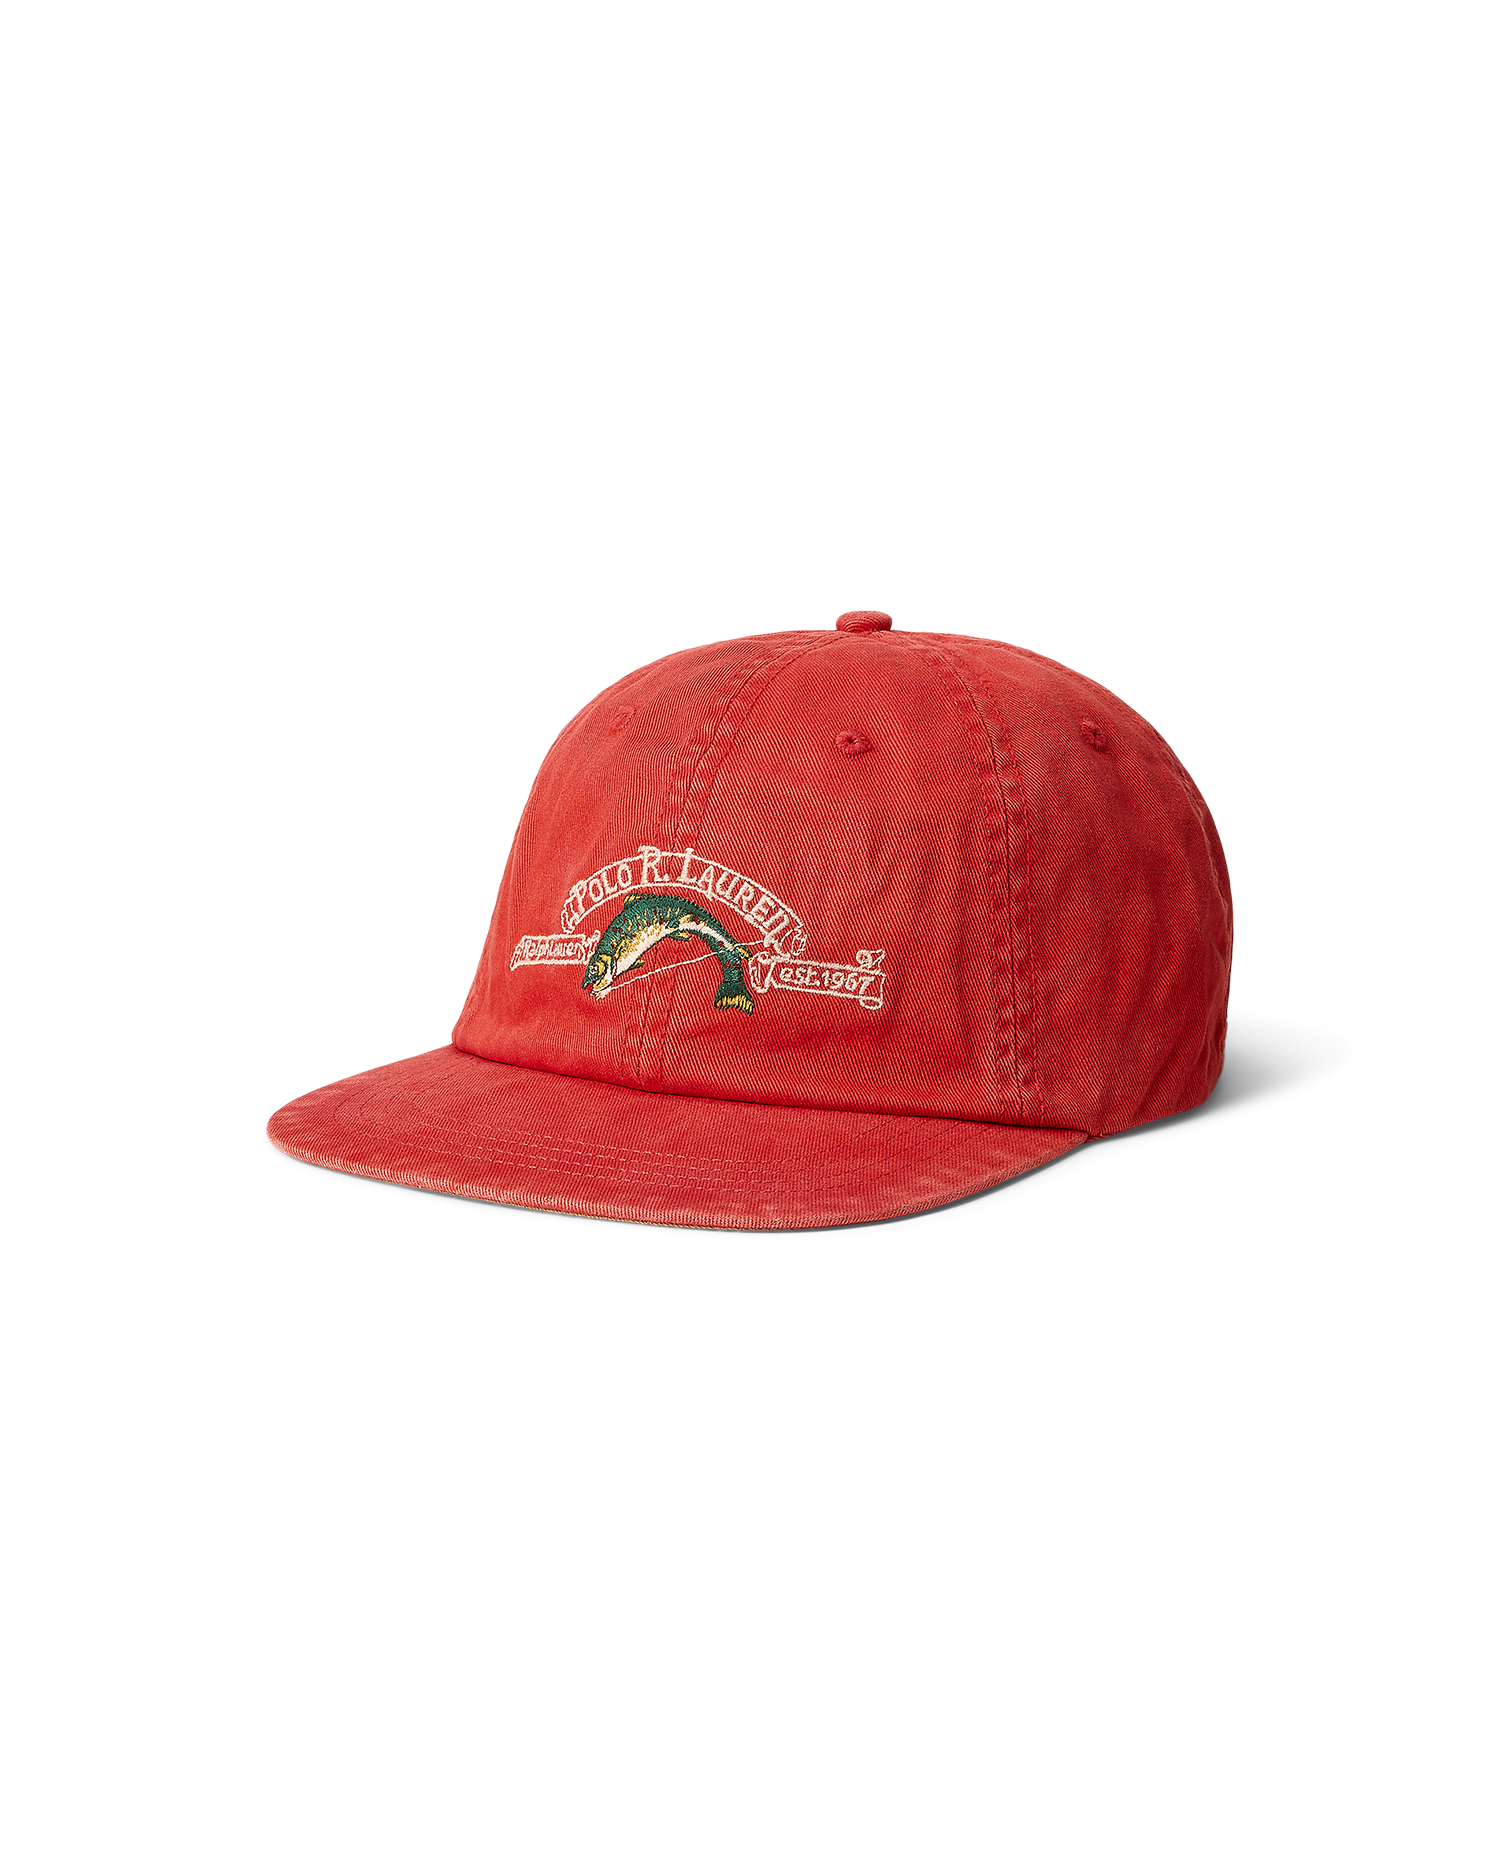 Polo Sportsman Twill Ball Cap - Red